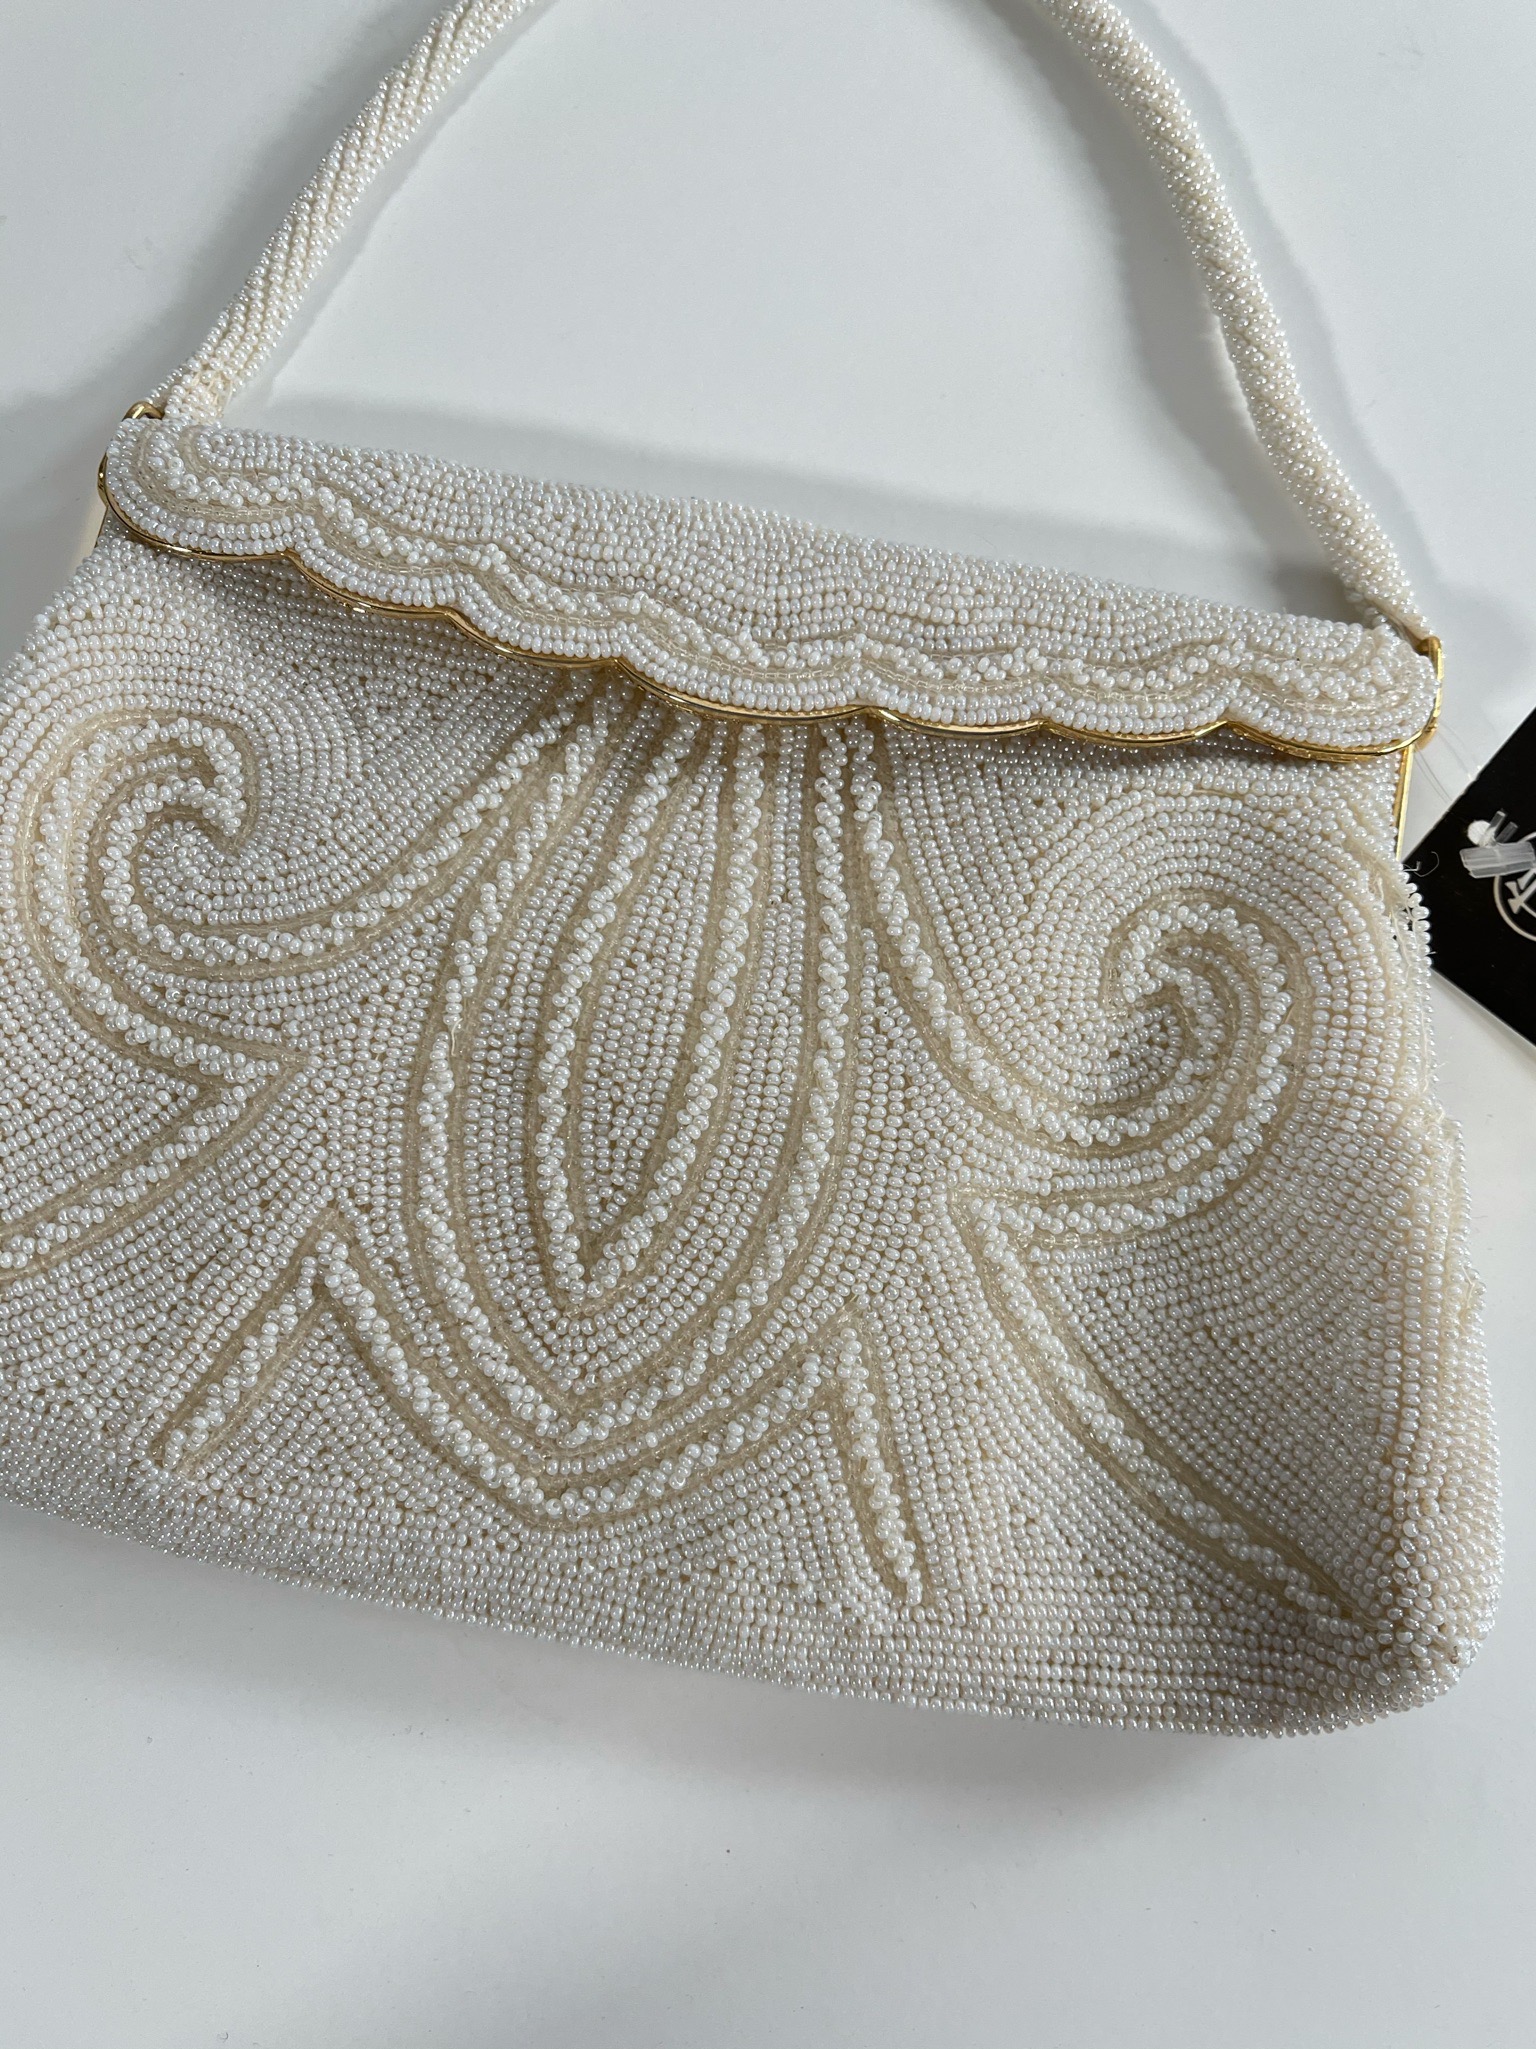 Vintage Hand Beaded in Belgium White/Ivory Clutch Evening Bag Kiss Clo –  Pathway Market GR